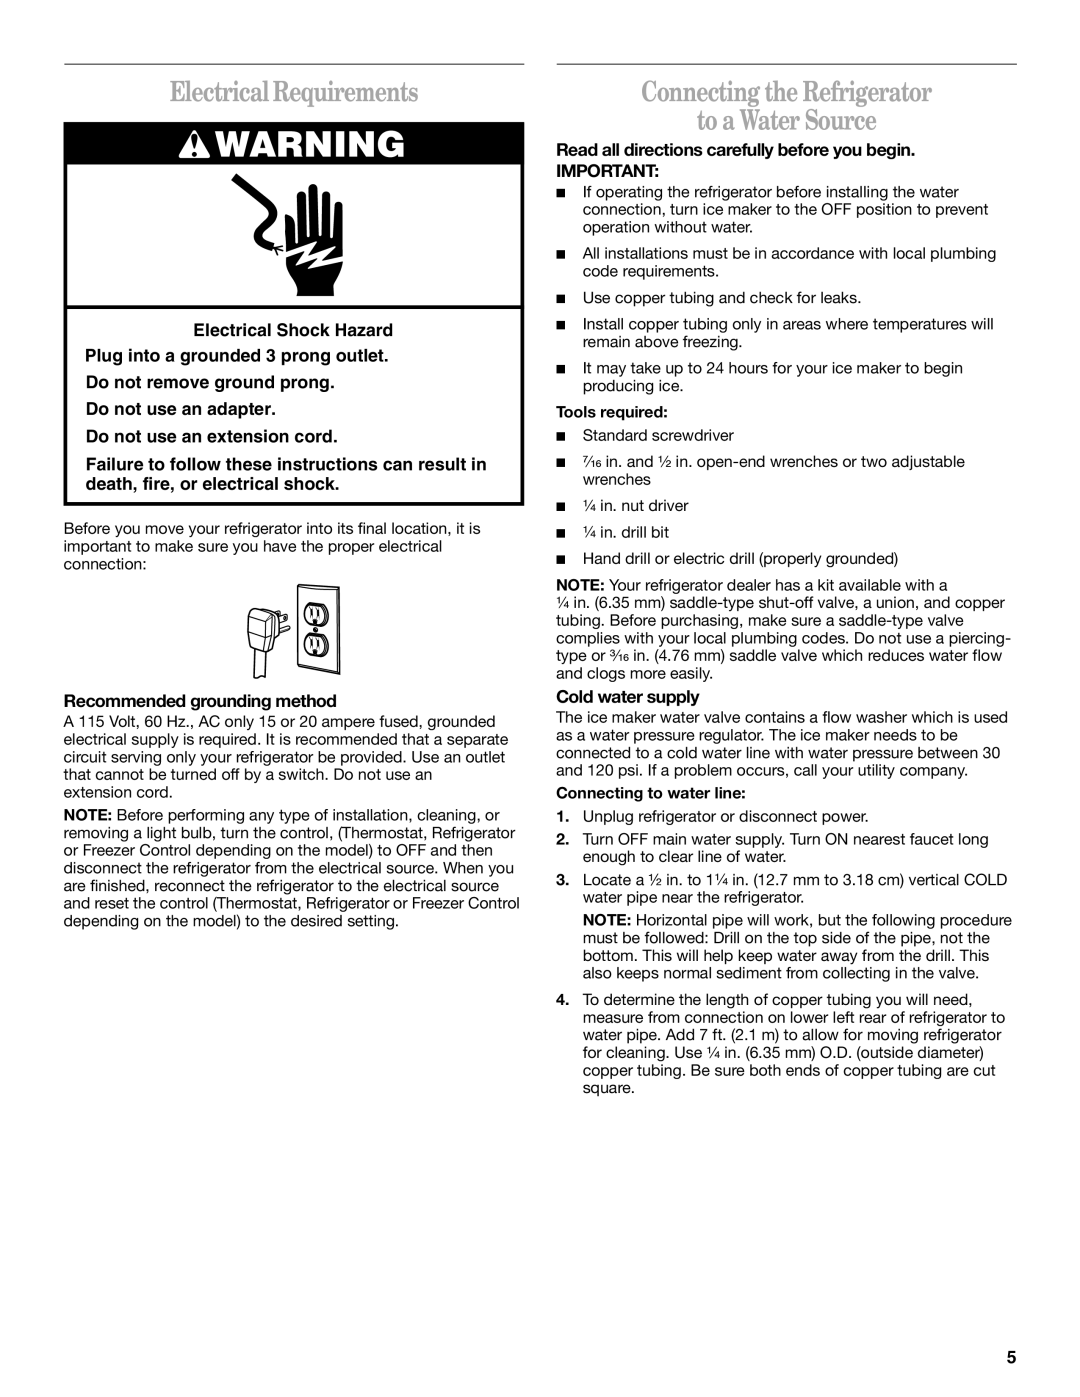 Whirlpool 2212539 Electrical Requirements, Connecting the Refrigerator to a Water Source, Do not use an extension cord 